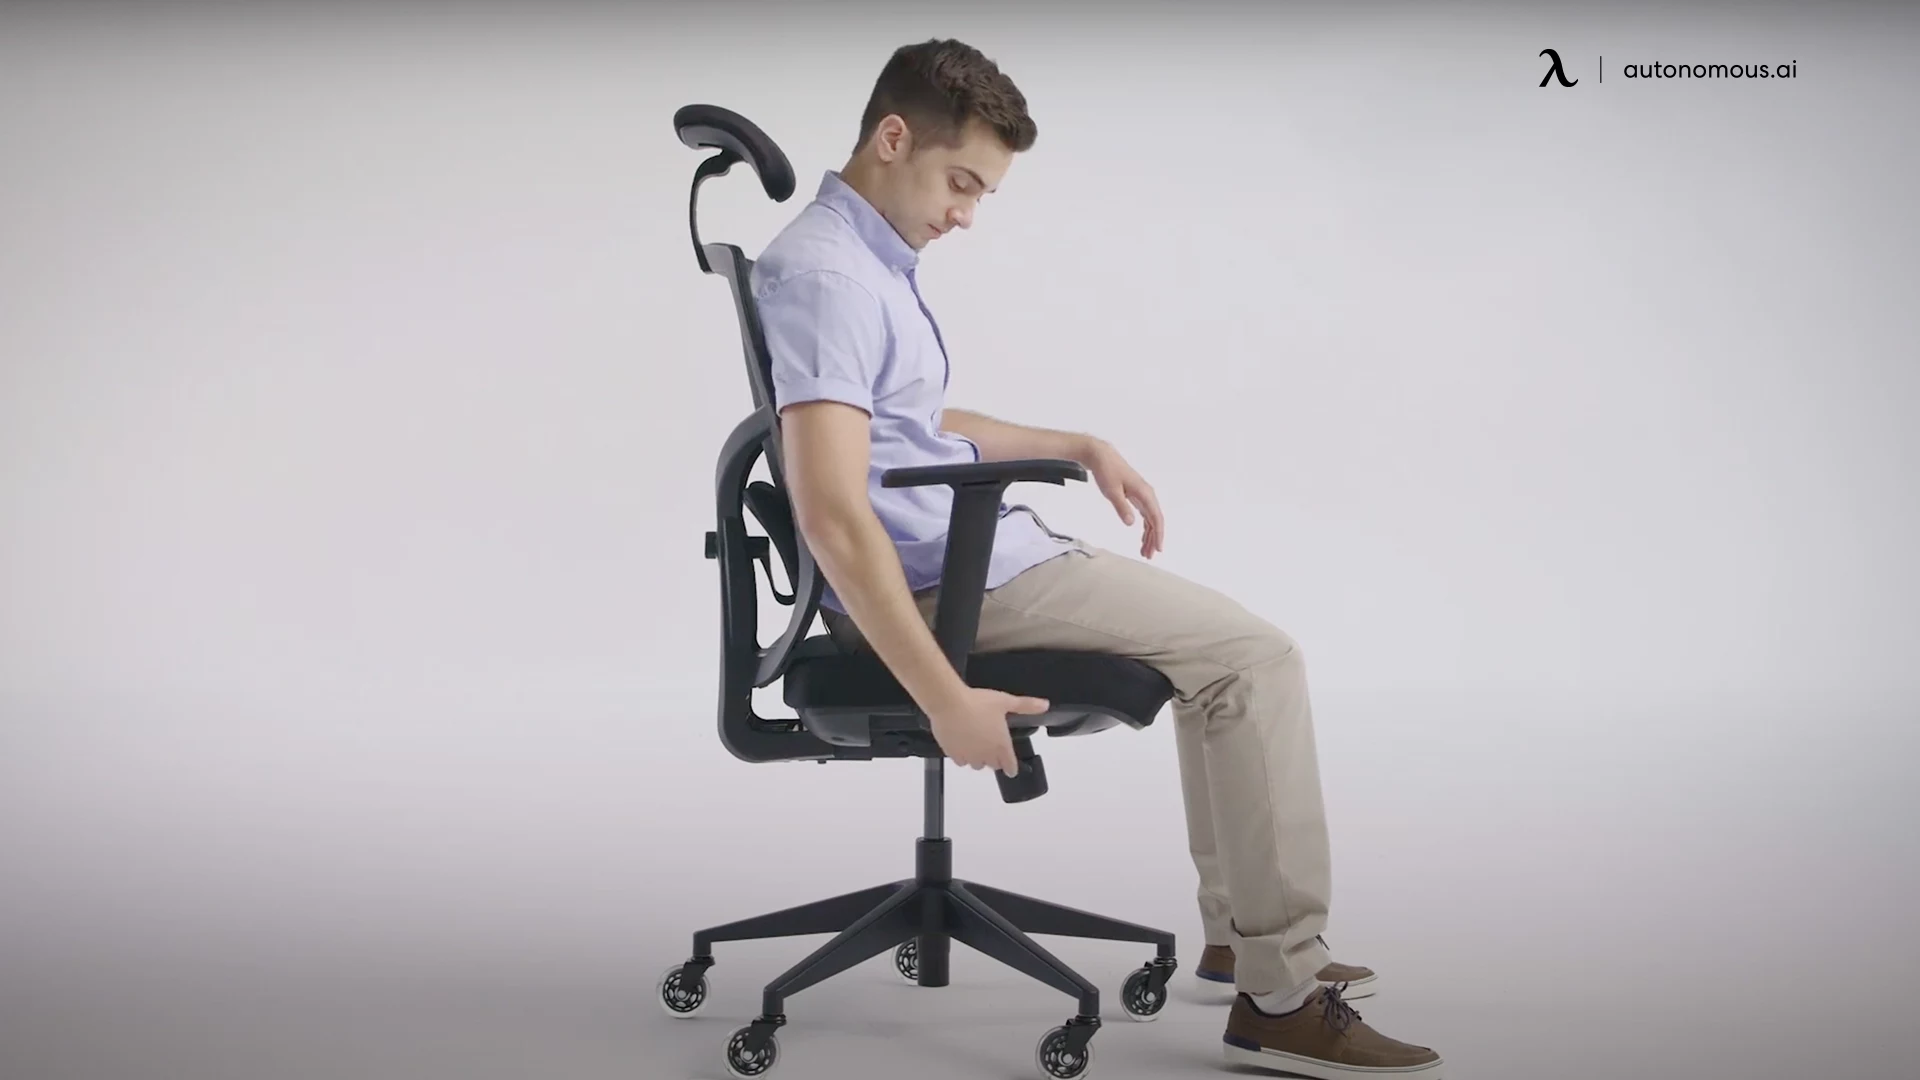 Adjustability of The Office Oasis ergonomic mesh office chair